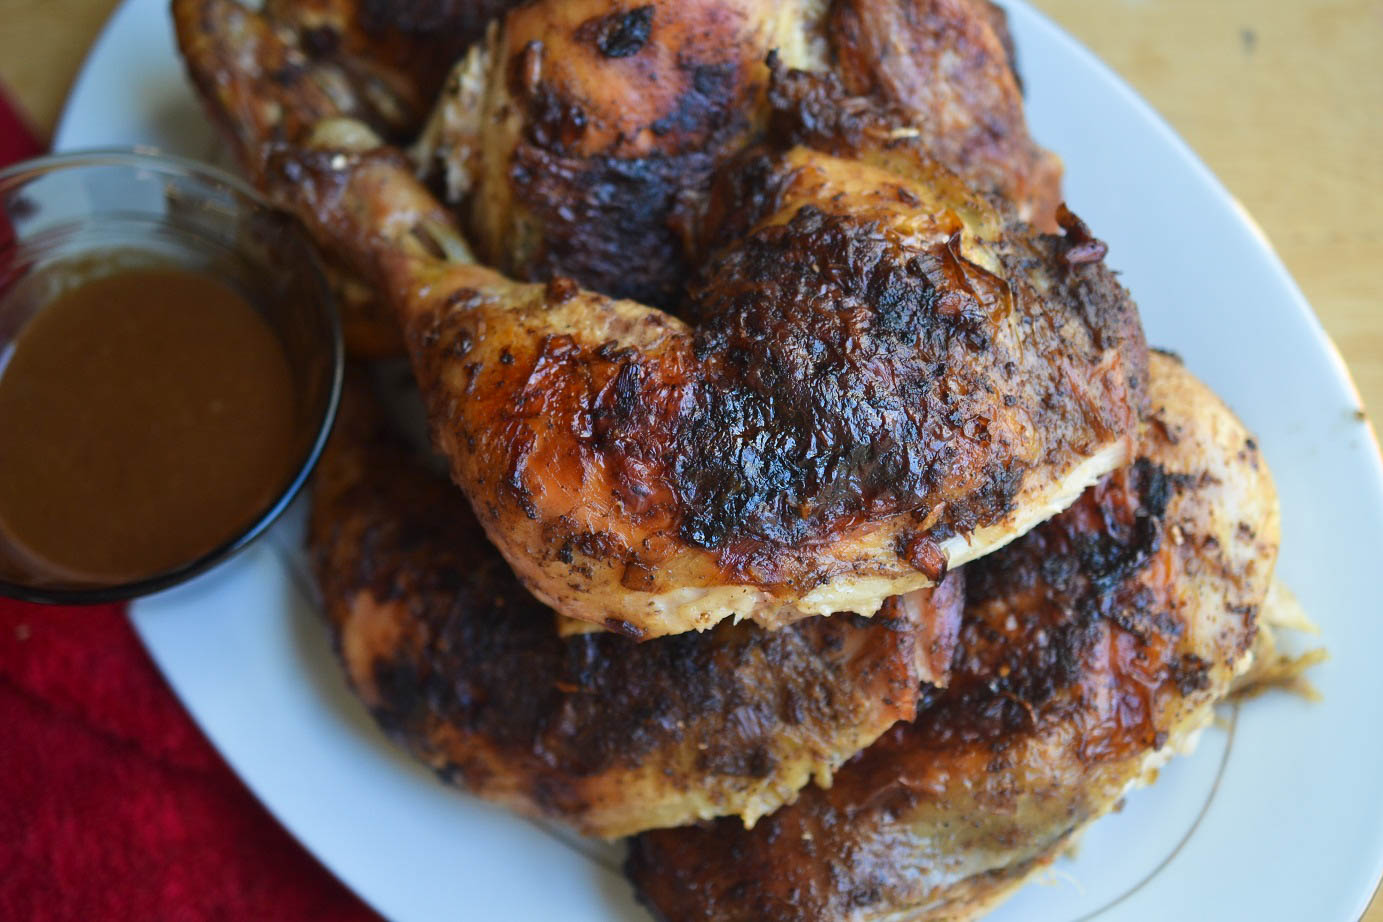 Greedy Girl : Pomegranate and ginger Roasted chicken